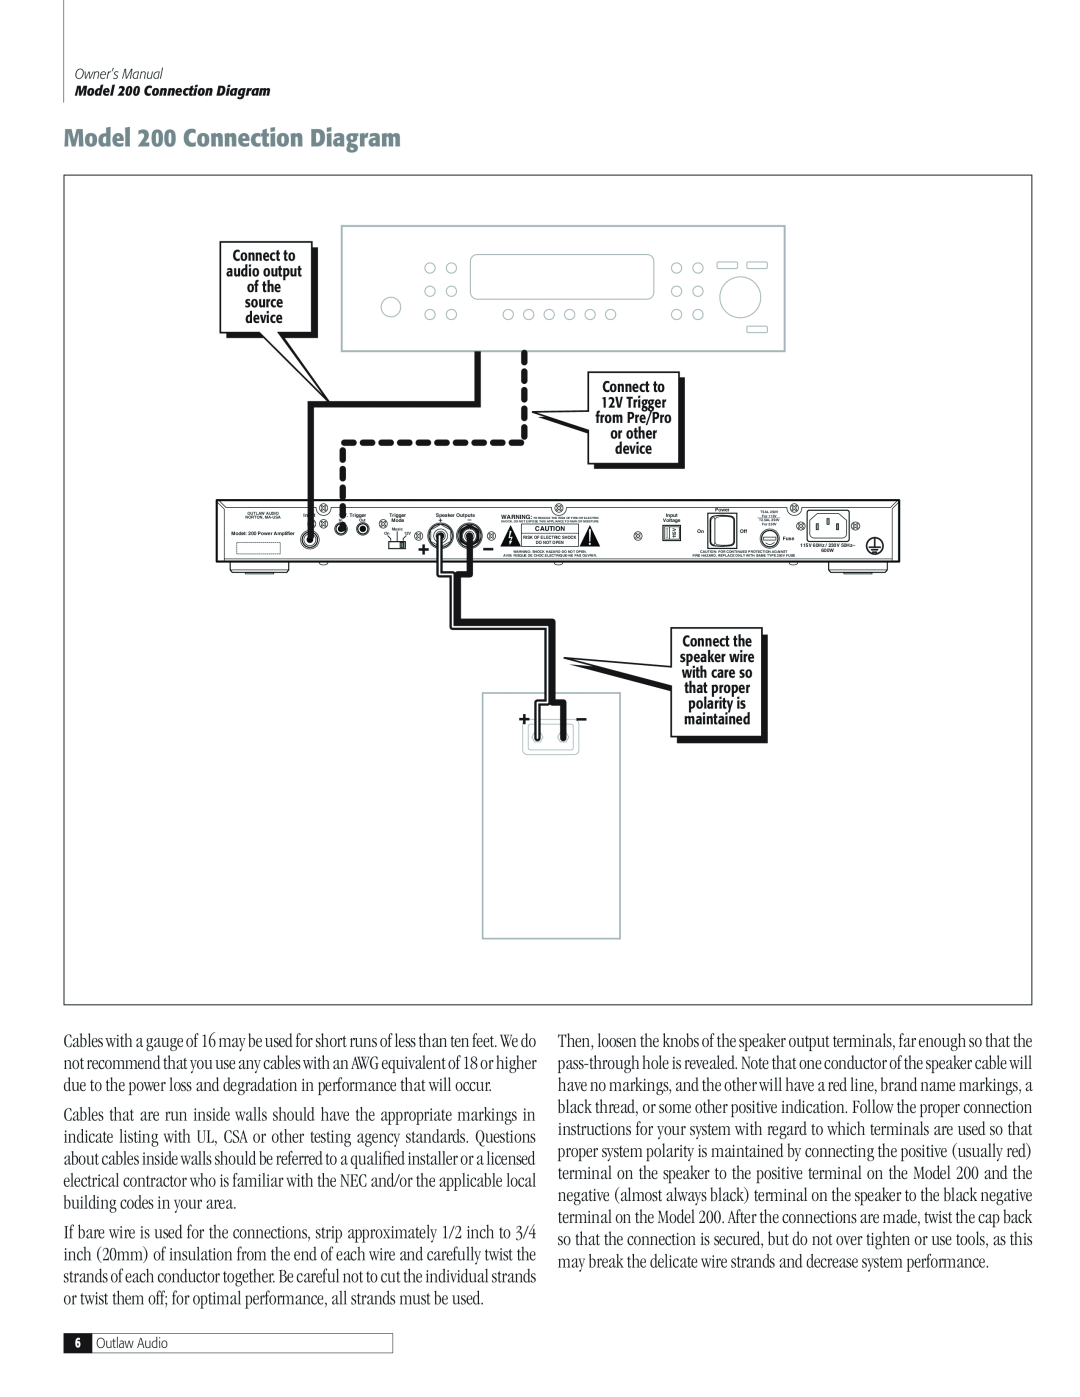 Outlaw Audio 200 M-Block owner manual Model 200 Connection Diagram 